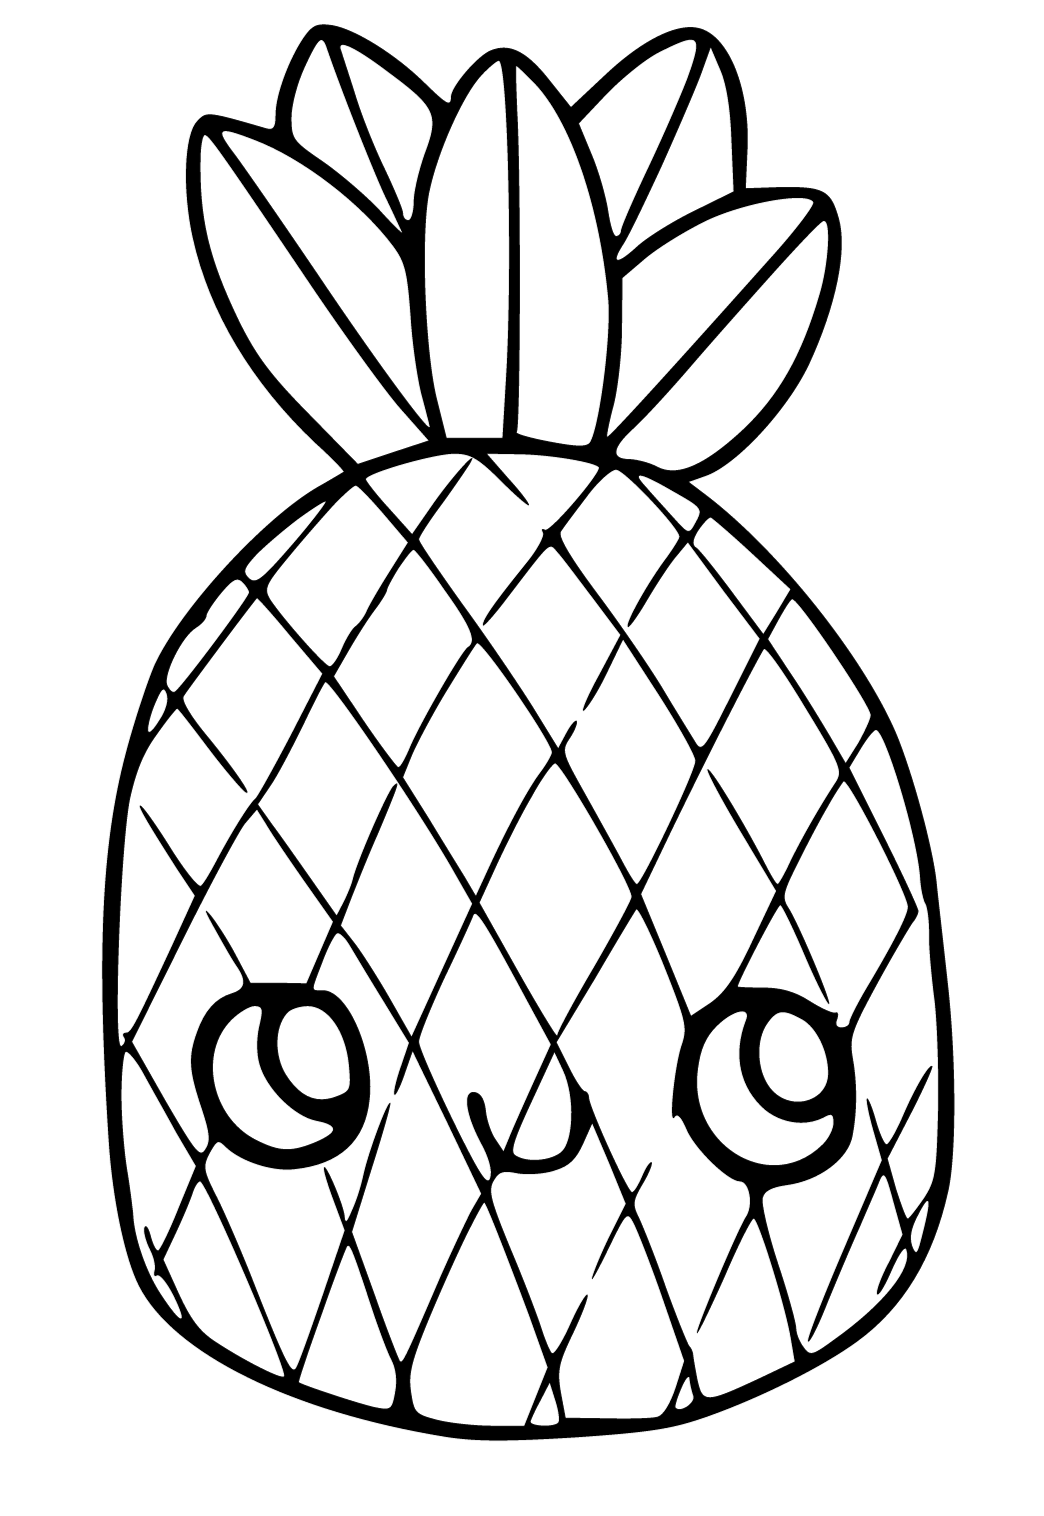 Free printable cute kawaii pineapple coloring page sheet and picture for adults and kids girls and boys